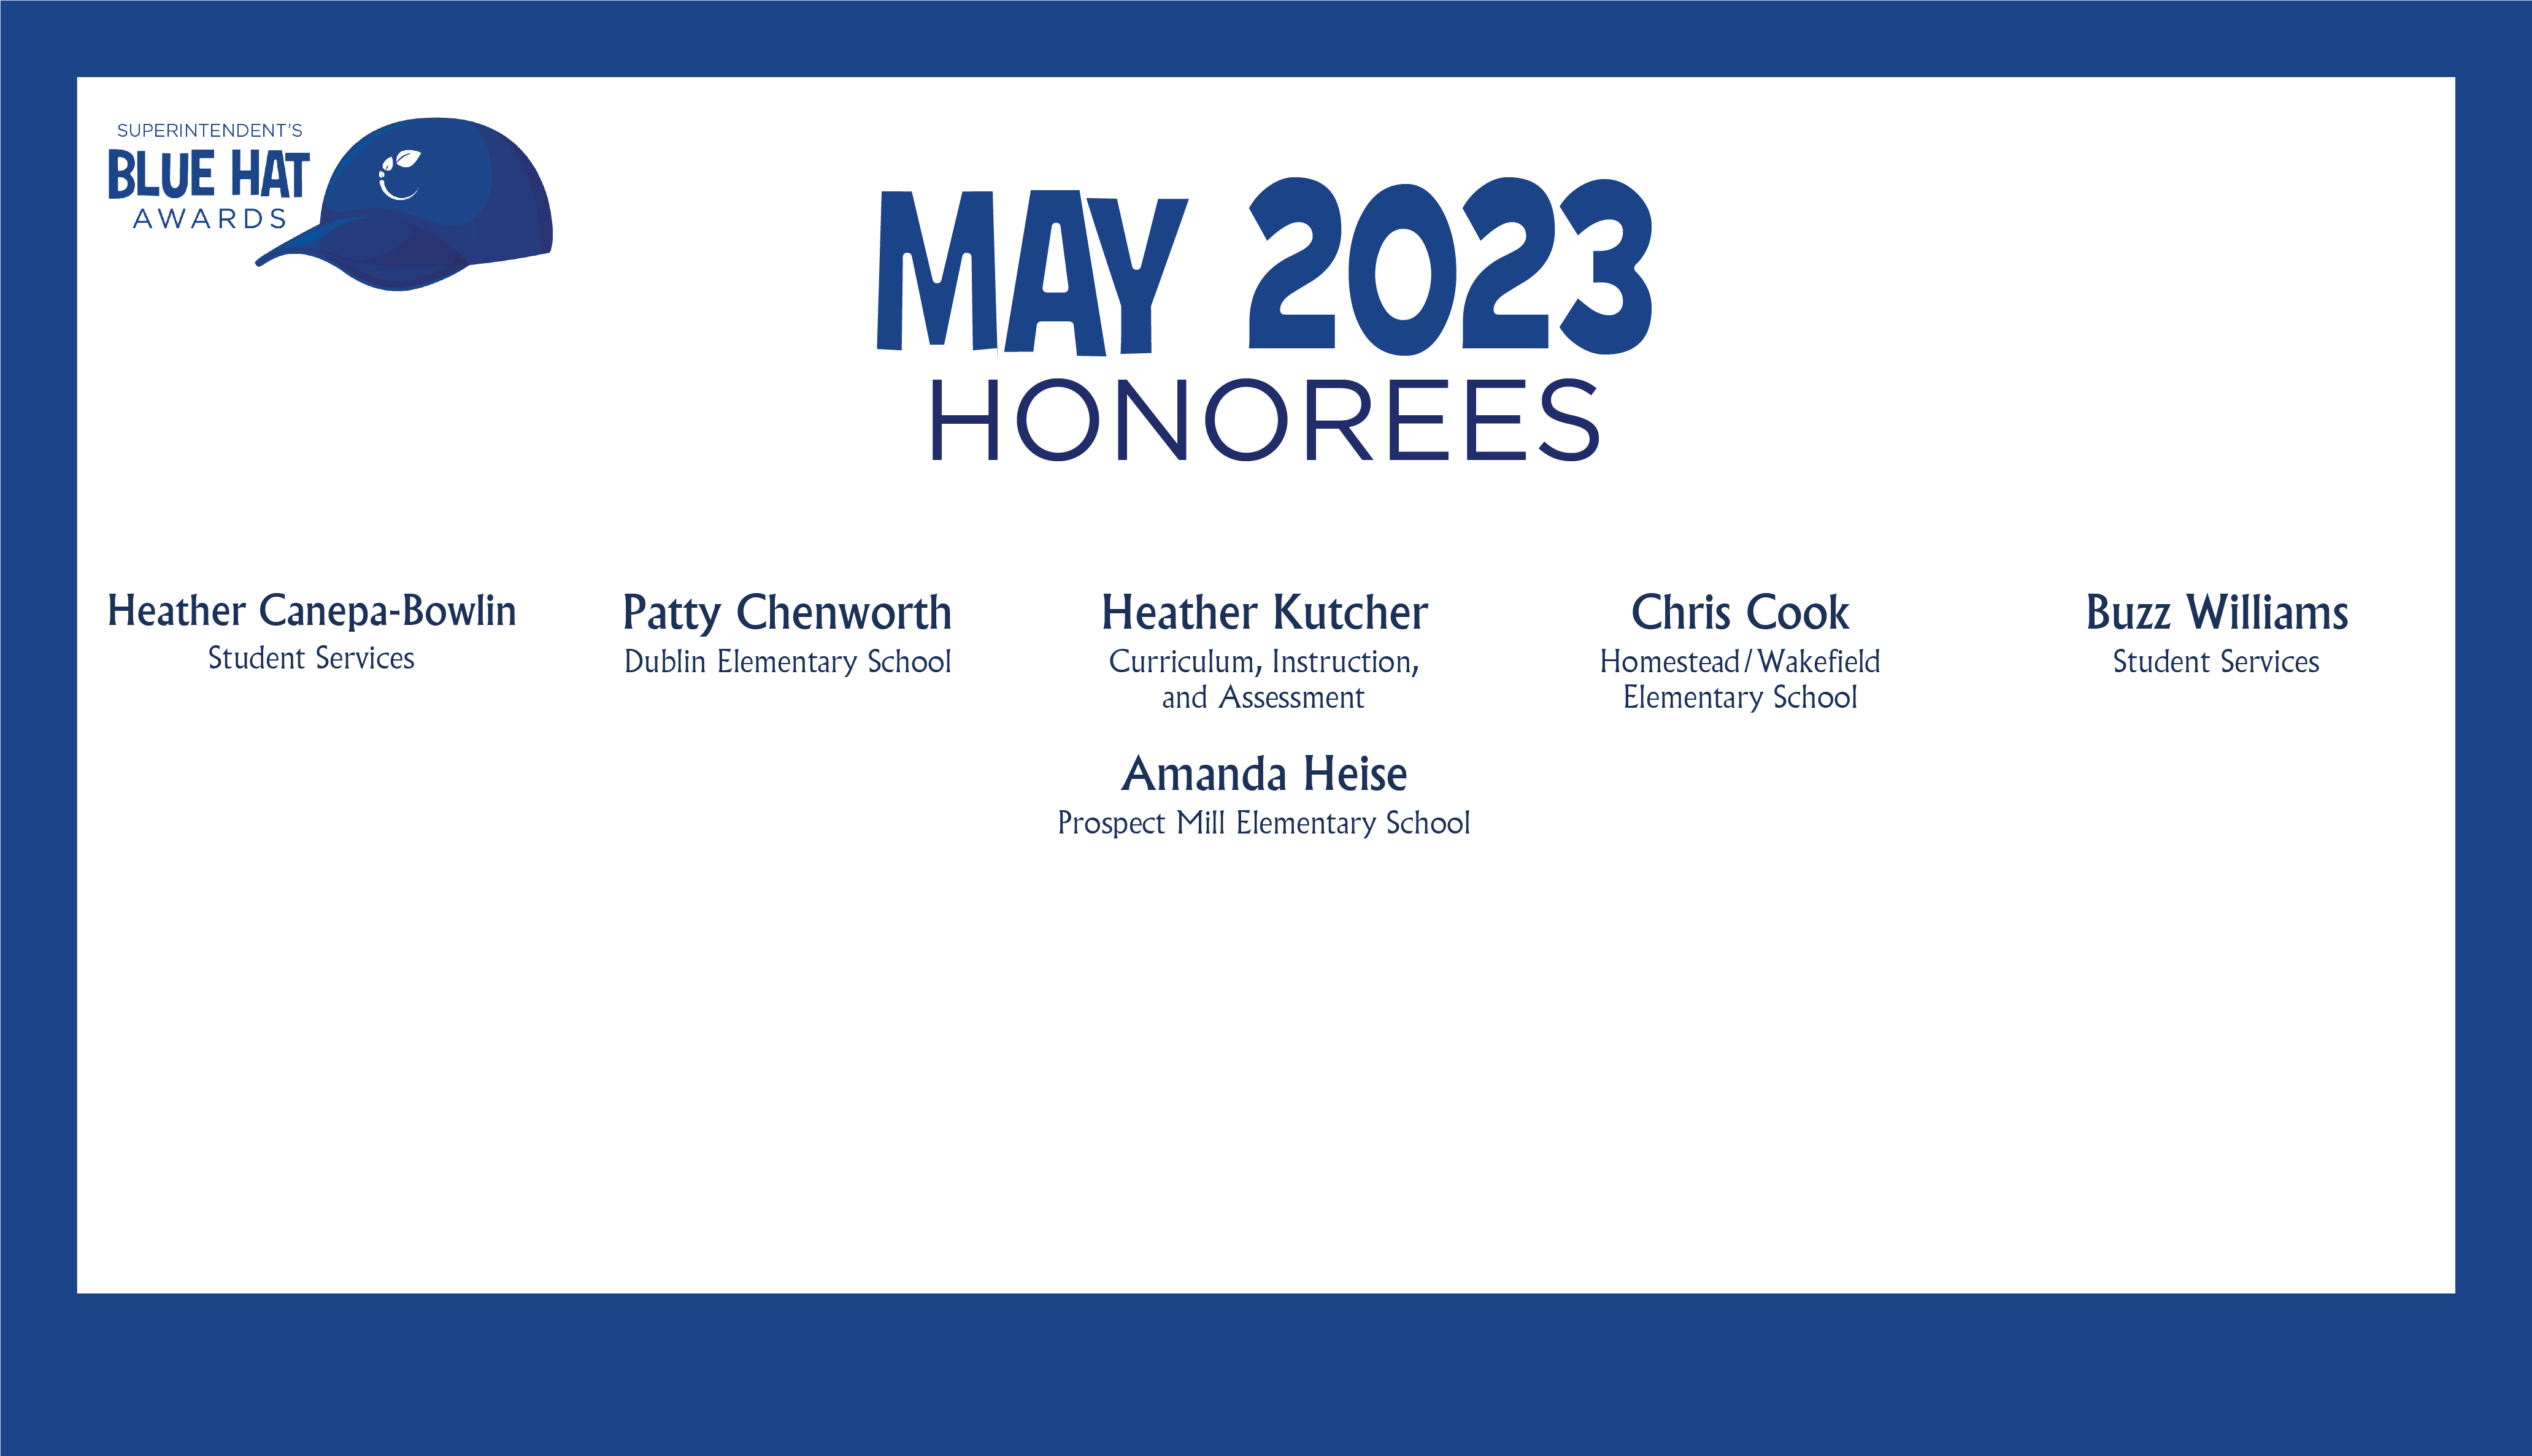 HCPS Blue Hat Honorees - May 2023